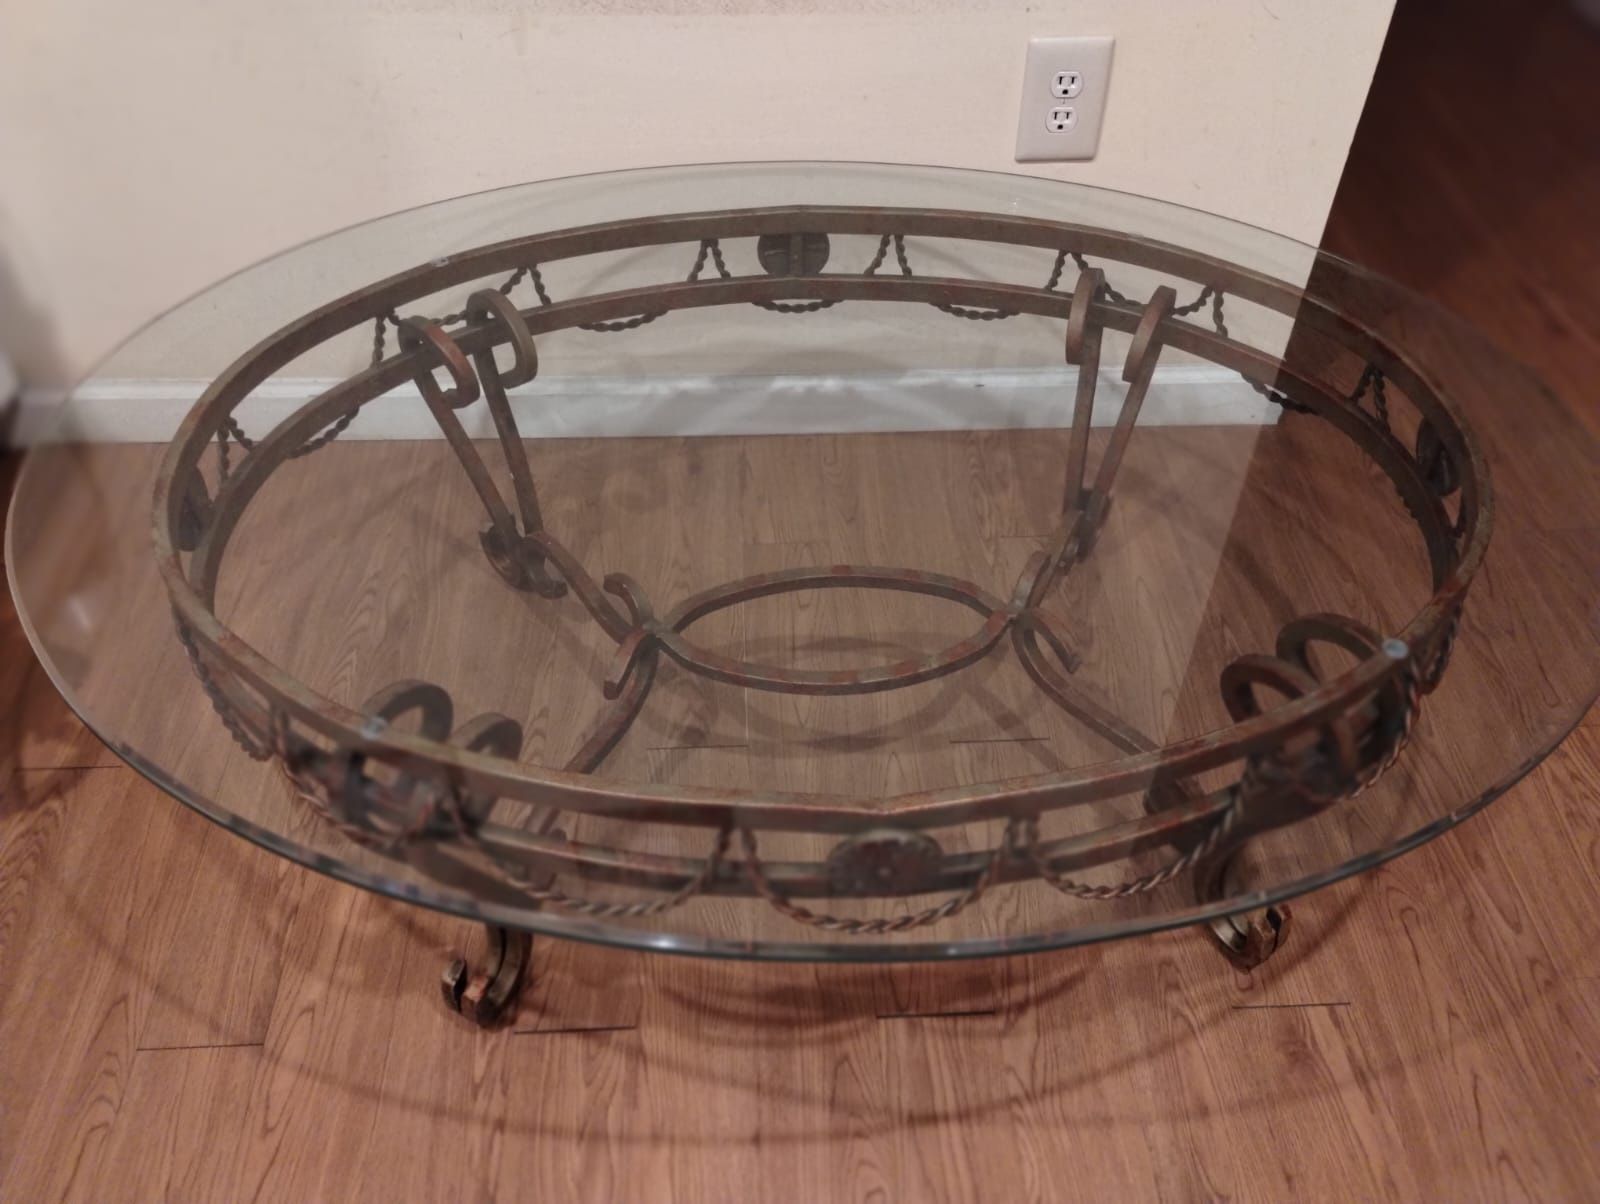 Wrought Iron Oval Coffee Table